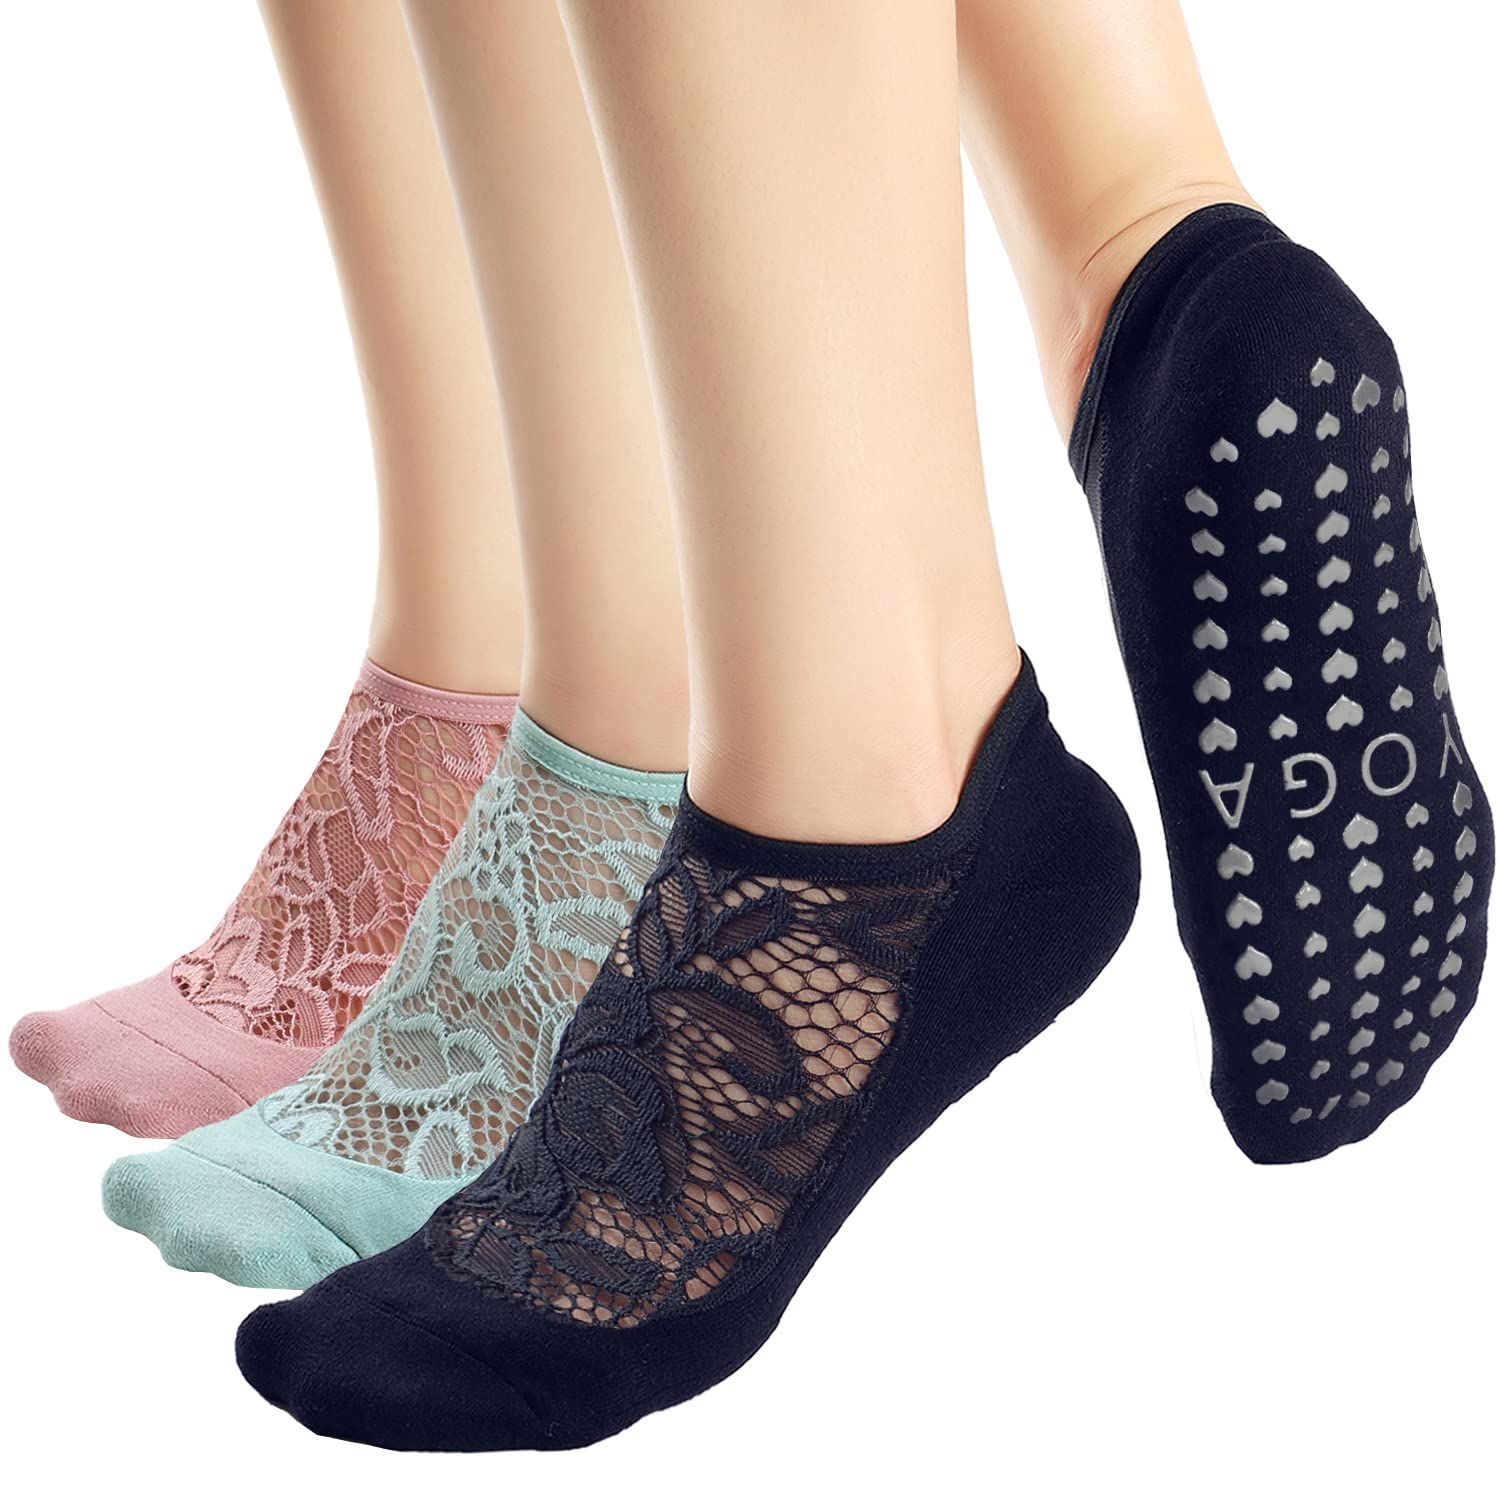 These Amazing Grip Socks Will Guarantee You’ll Never Slip During Yoga Again